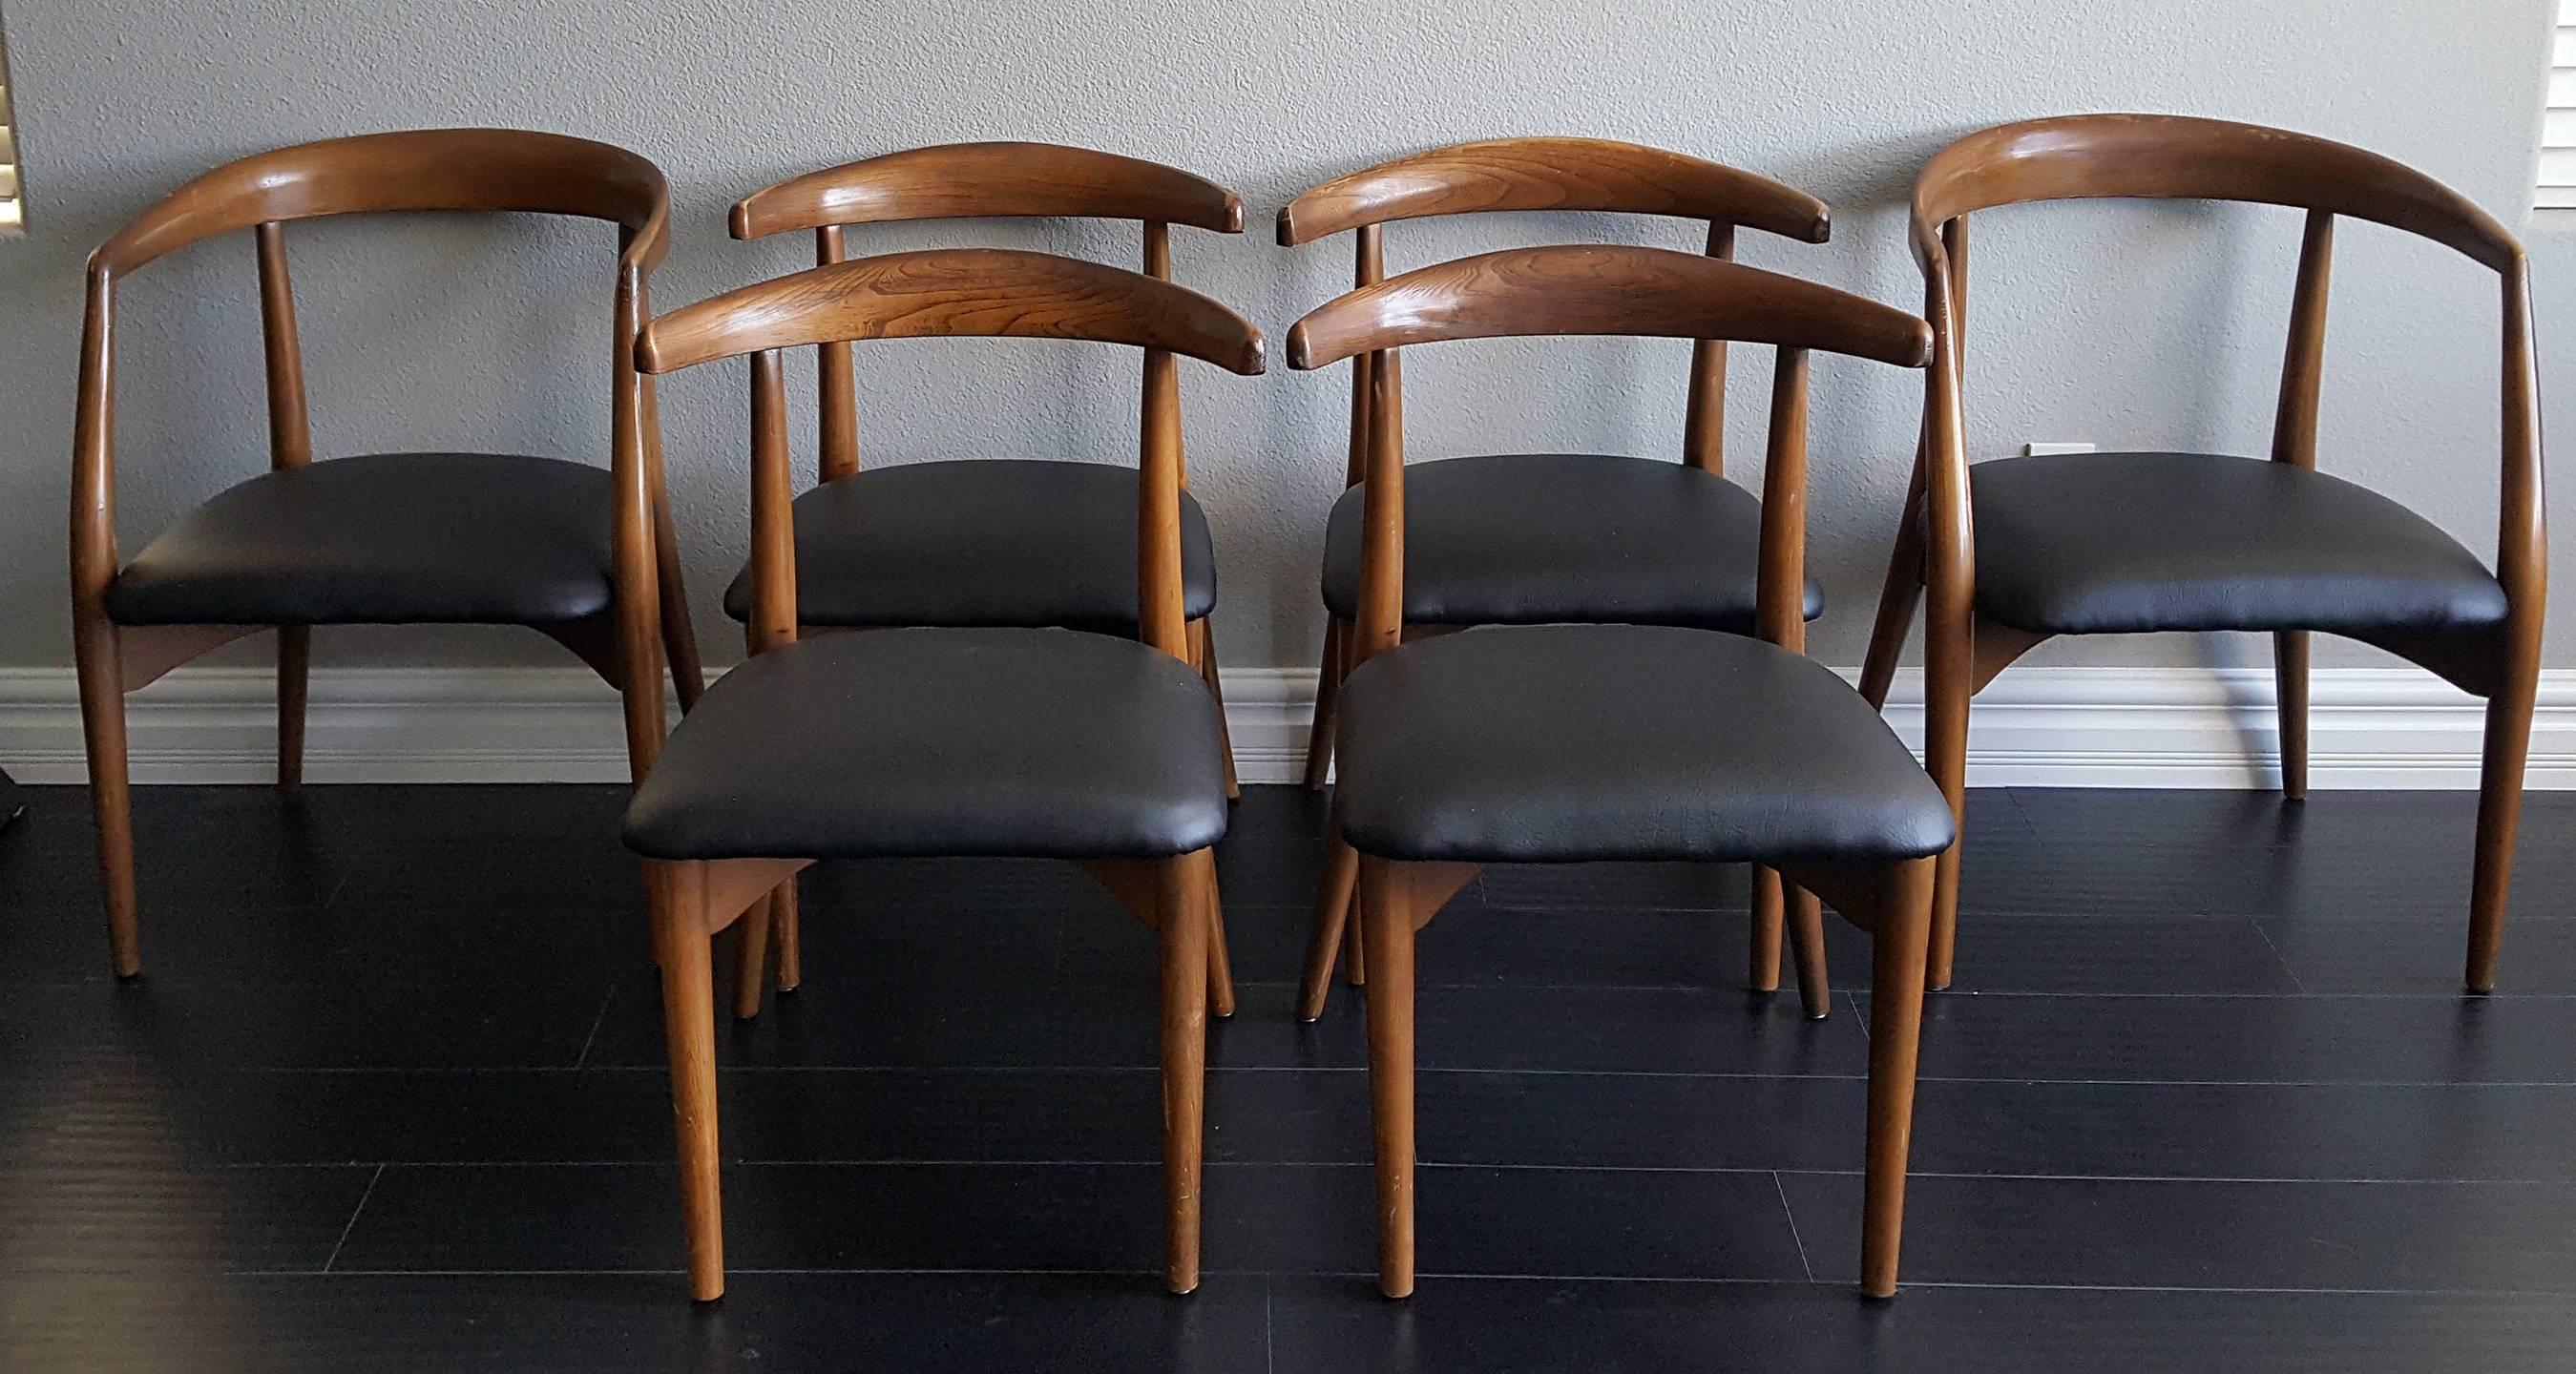 A stunning set of six Lawrence Peabody sculptural dining chairs for Richardson Nemschoff, manufactured by Richardson Brothers, with original tags. The chairs are upholstered in a black vinyl and the walnut frames have a stunning patina or weathered